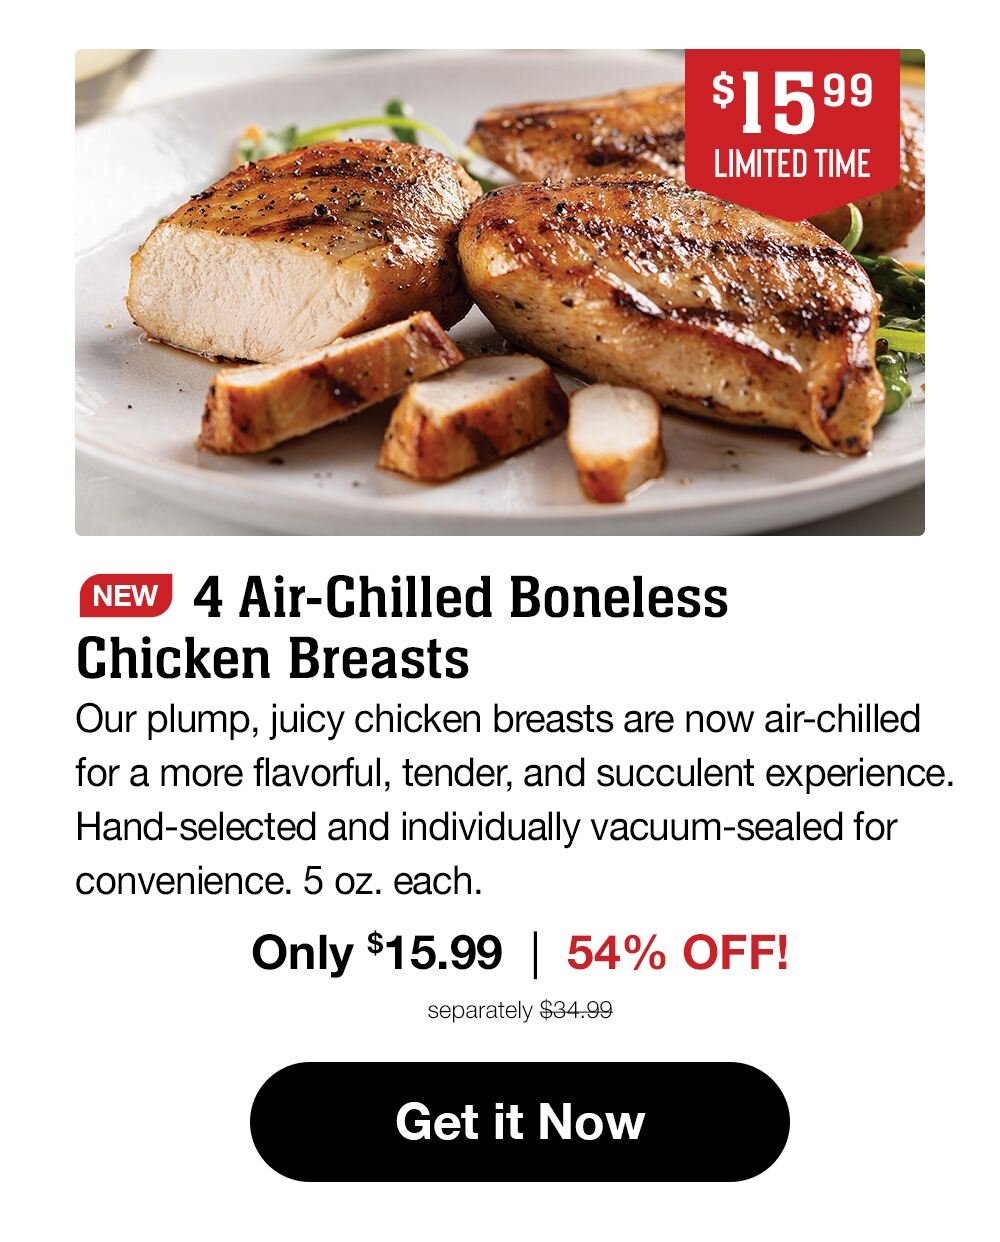 $15.99 LIMITED TIME | NEW 4 Air-Chilled Boneless Chicken Breasts | Our plump, juicy chicken breasts are now air-chilled for a more flavorful, tender, and succulent experience. Hand-selected and individually vacuum-sealed for convenience. 5 oz. each. | Only $15.99 | 54% OFF! | separately $34.99 || Get it Now